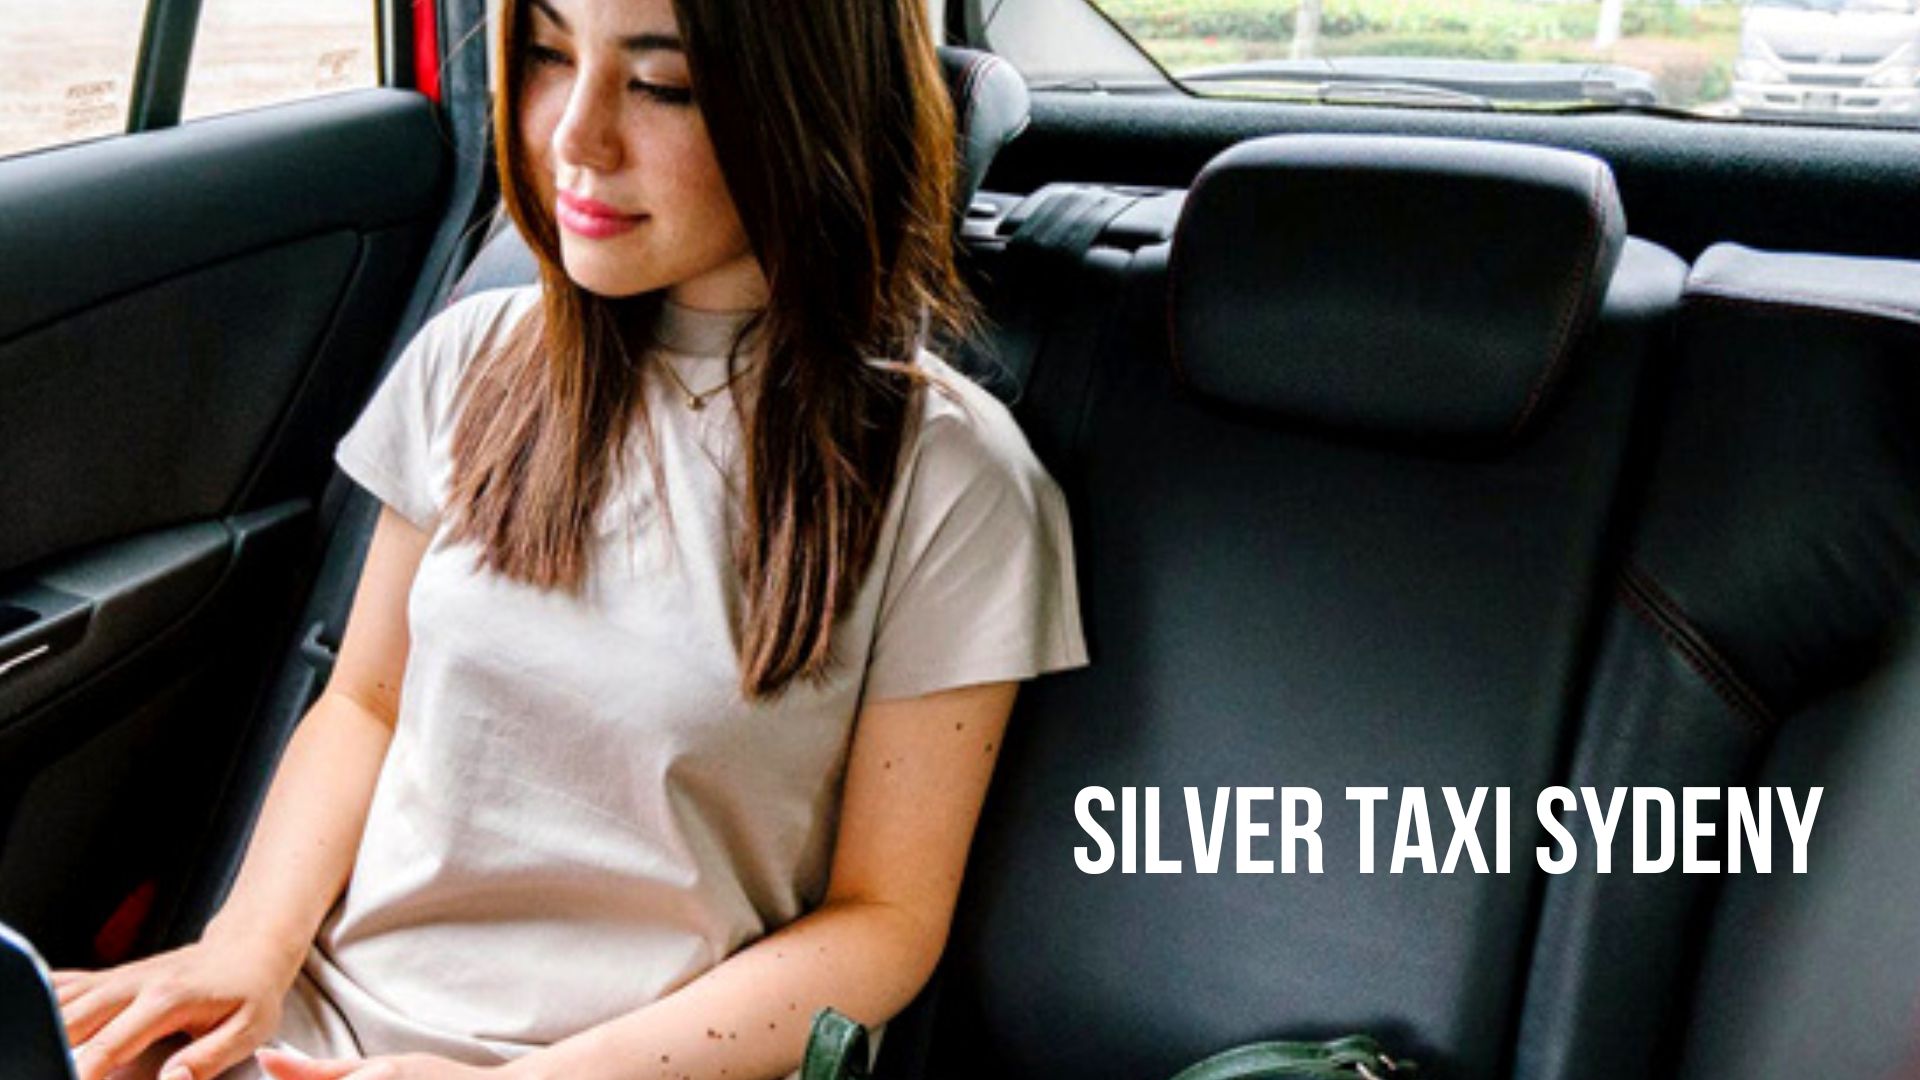 Silver Taxi Sydeny service